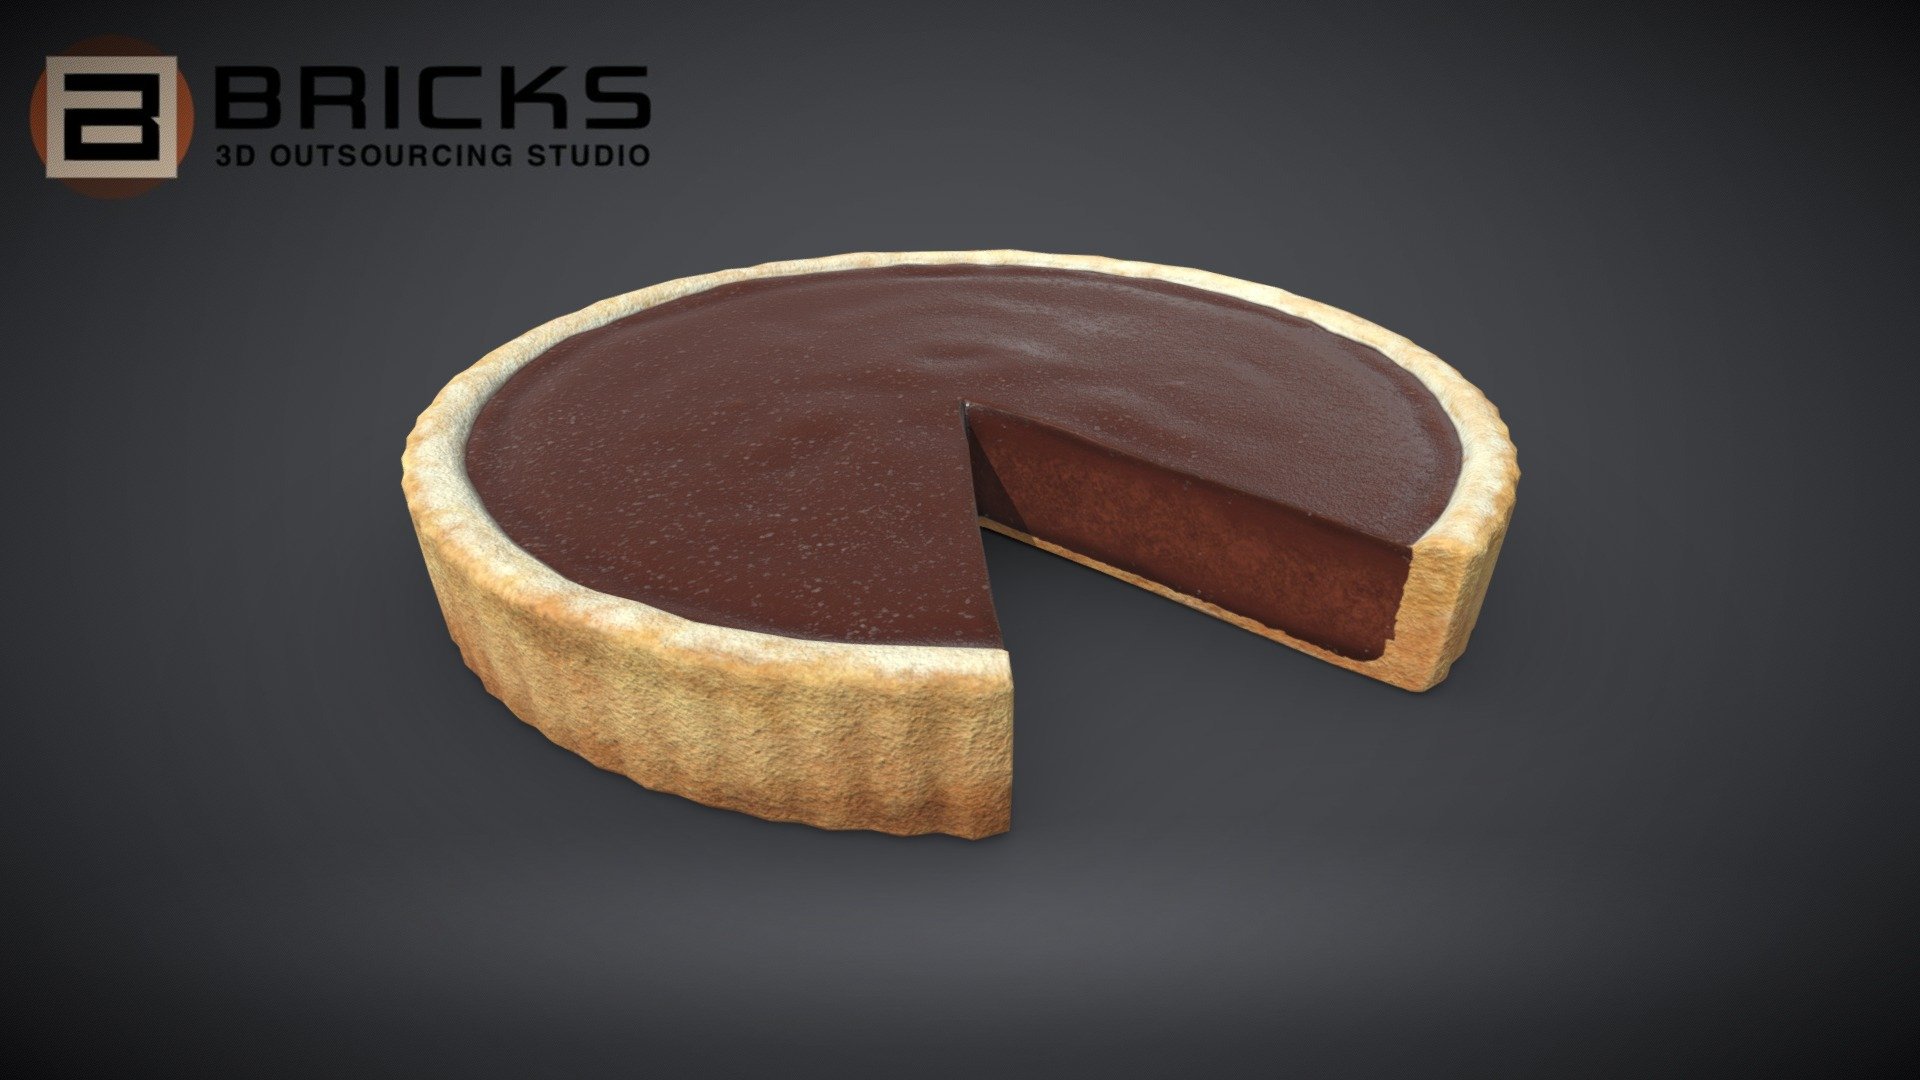 PBR Food Asset:
ChocolatePie_Chart
Polycount: 1594
Vertex count: 799
Texture Size: 2048px x 2048px
Normal: OpenGL

If you need any adjust in file please contact us: team@bricks3dstudio.com

Hire us: tringuyen@bricks3dstudio.com
Here is us: https://www.bricks3dstudio.com/
        https://www.artstation.com/bricksstudio
        https://www.facebook.com/Bricks3dstudio/
        https://www.linkedin.com/in/bricks-studio-b10462252/ - ChocolatePieChart - Buy Royalty Free 3D model by Bricks Studio (@bricks3dstudio) 3d model